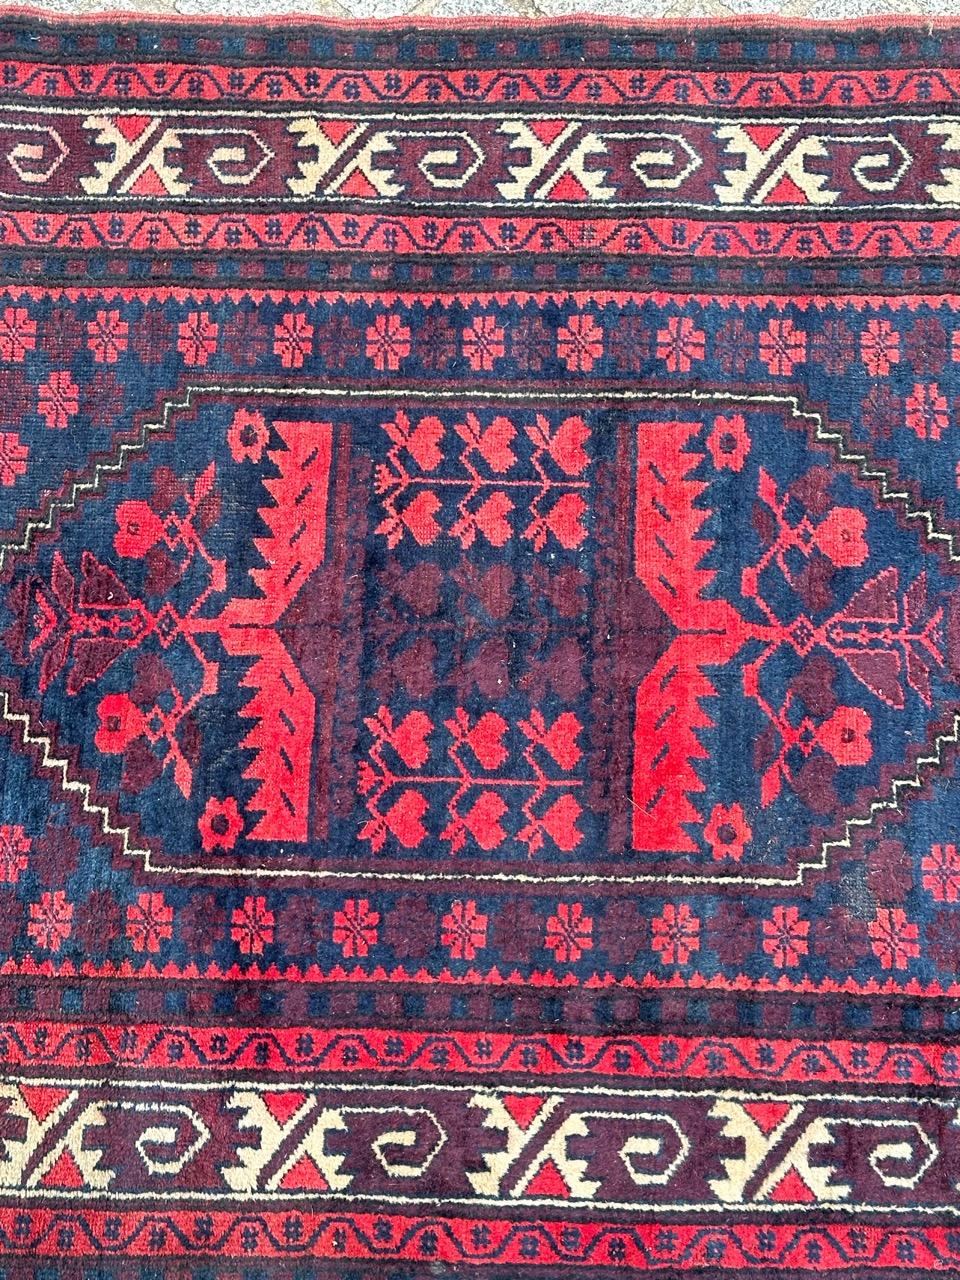 Nice mid century Turkish rug with beautiful geometrical design and nice colours with red, purple and navy blue, entirely hand knotted with wool on wool foundation. Some wears due to age and use.

✨✨✨
